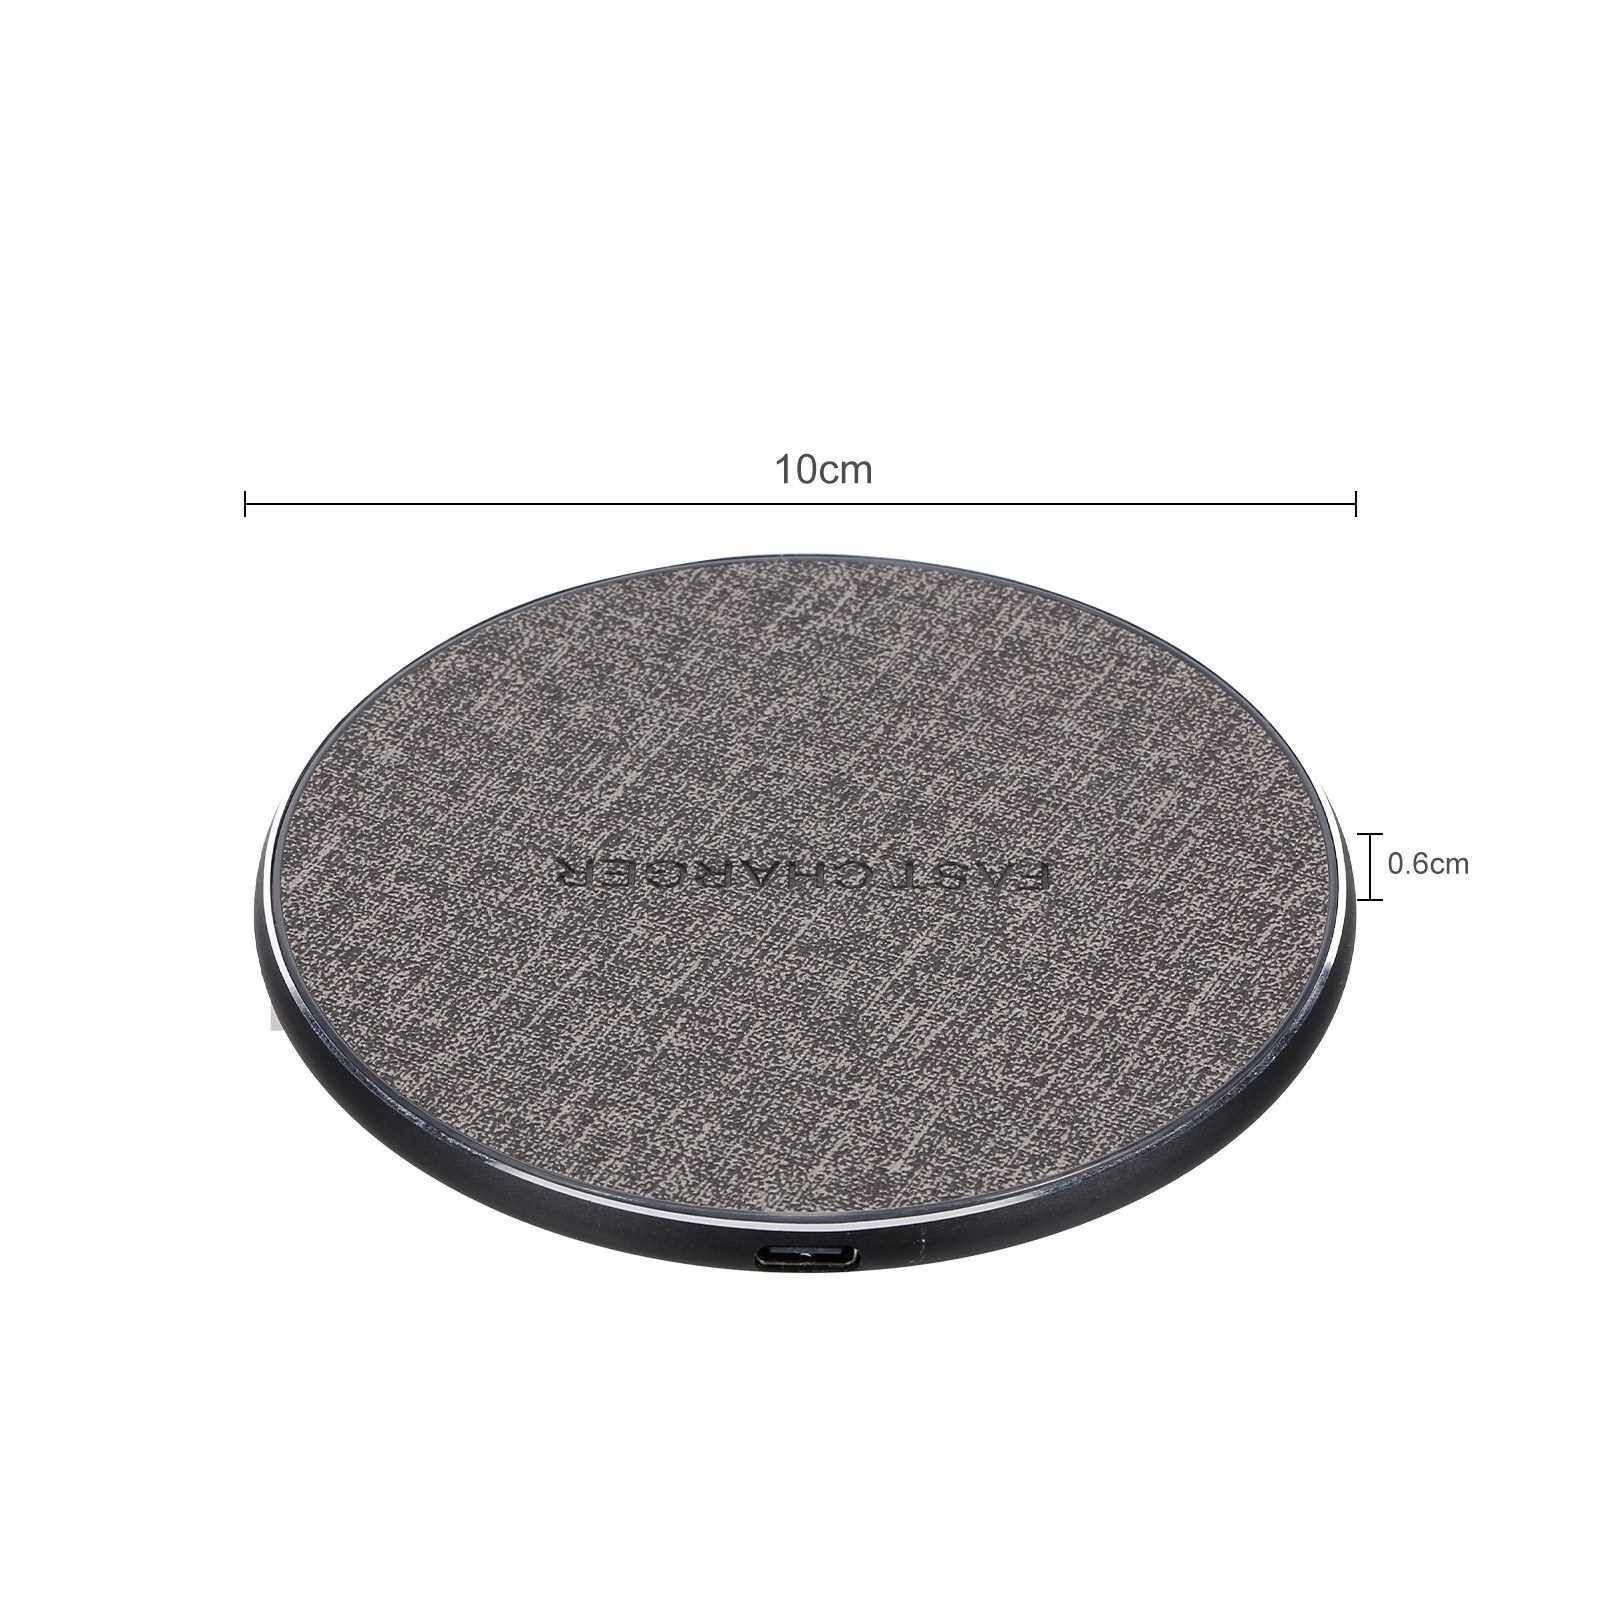 Wireless Charger Wireless Charging Base 15W Max Replacement for iPhone12 11 X XR XS Samsung Galaxy S9 S8 (Standard)